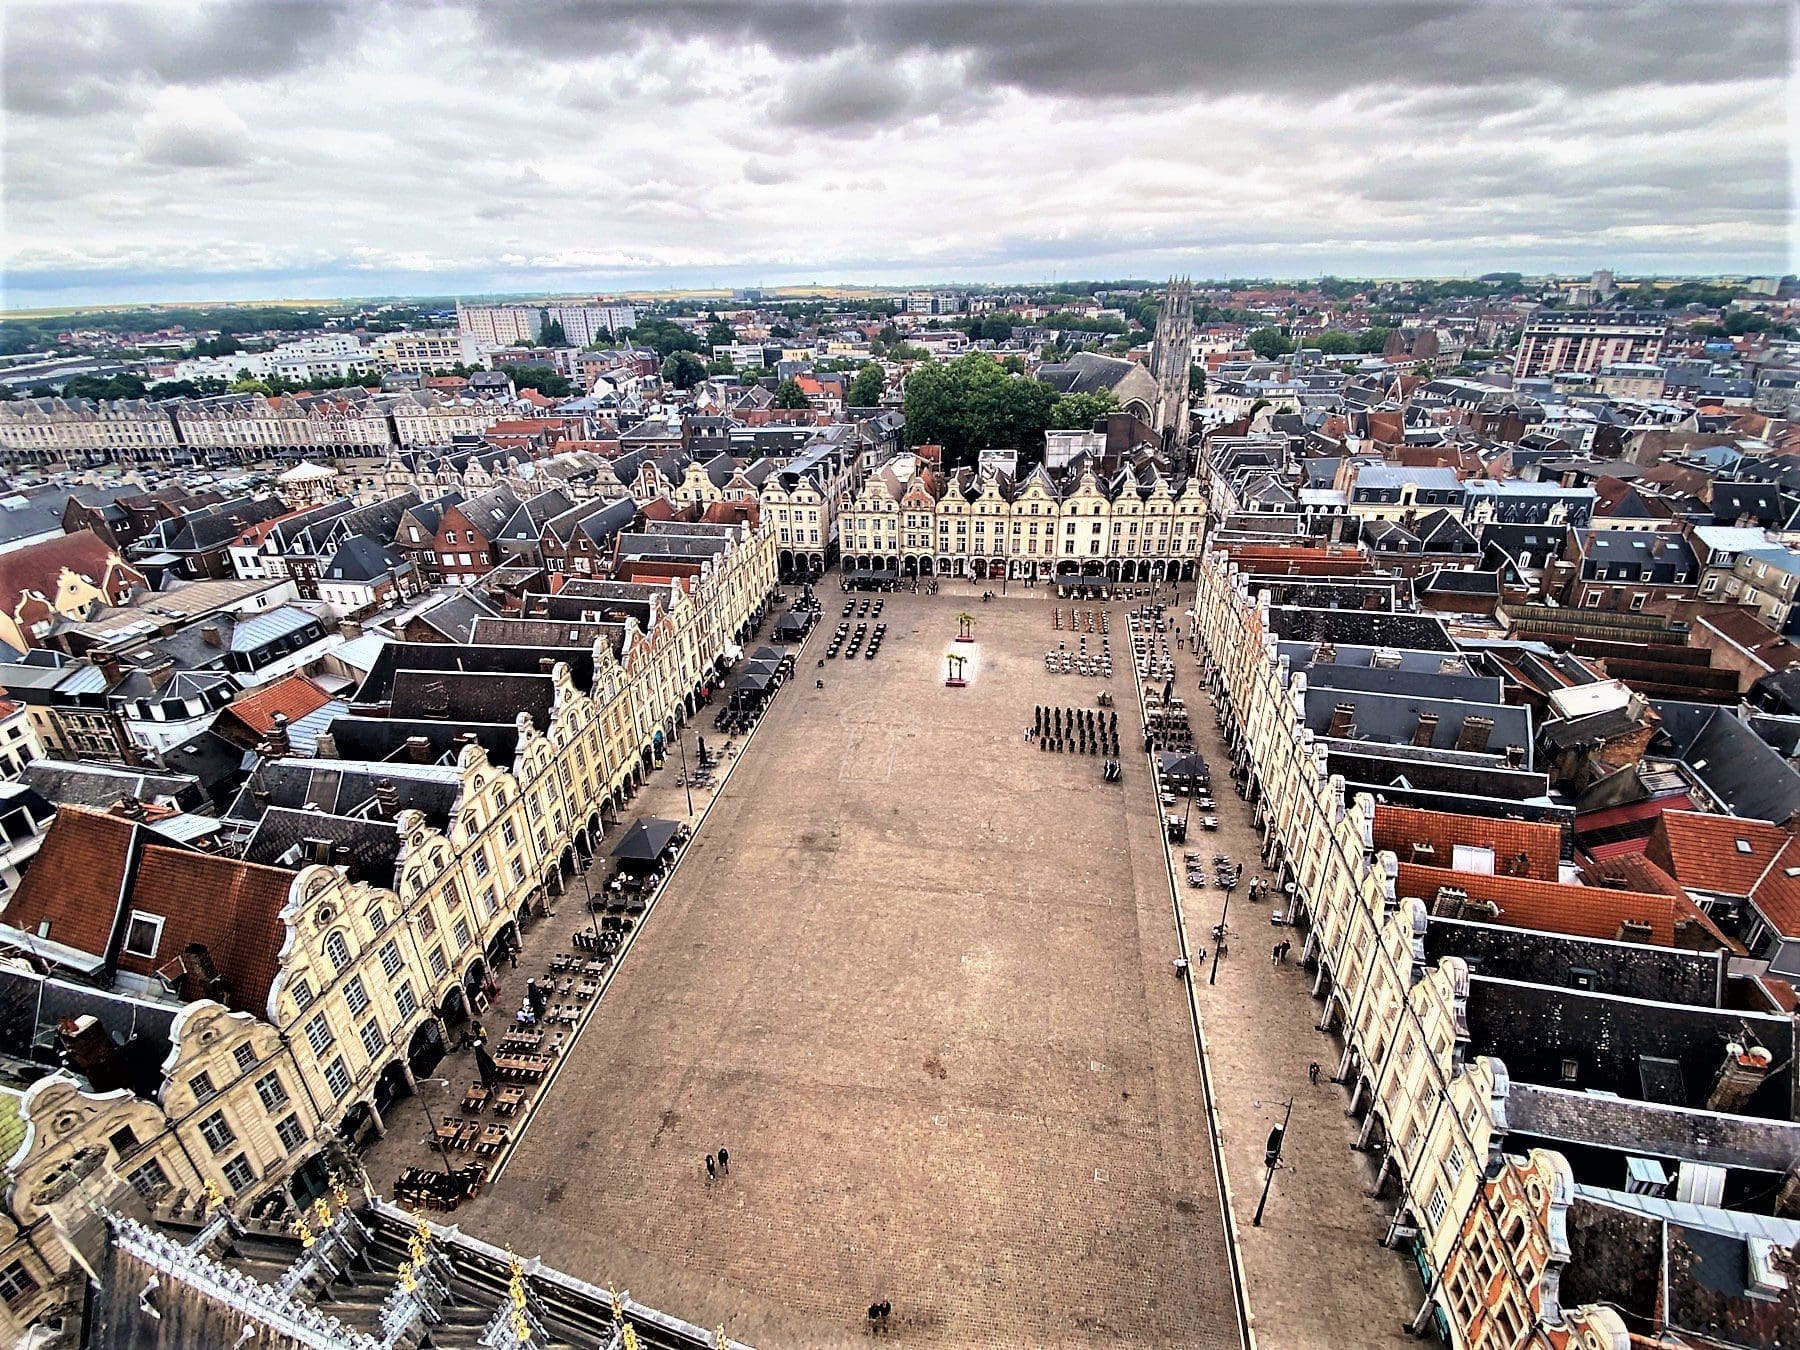 The Square of Heroes (Place des Heros) Arras France